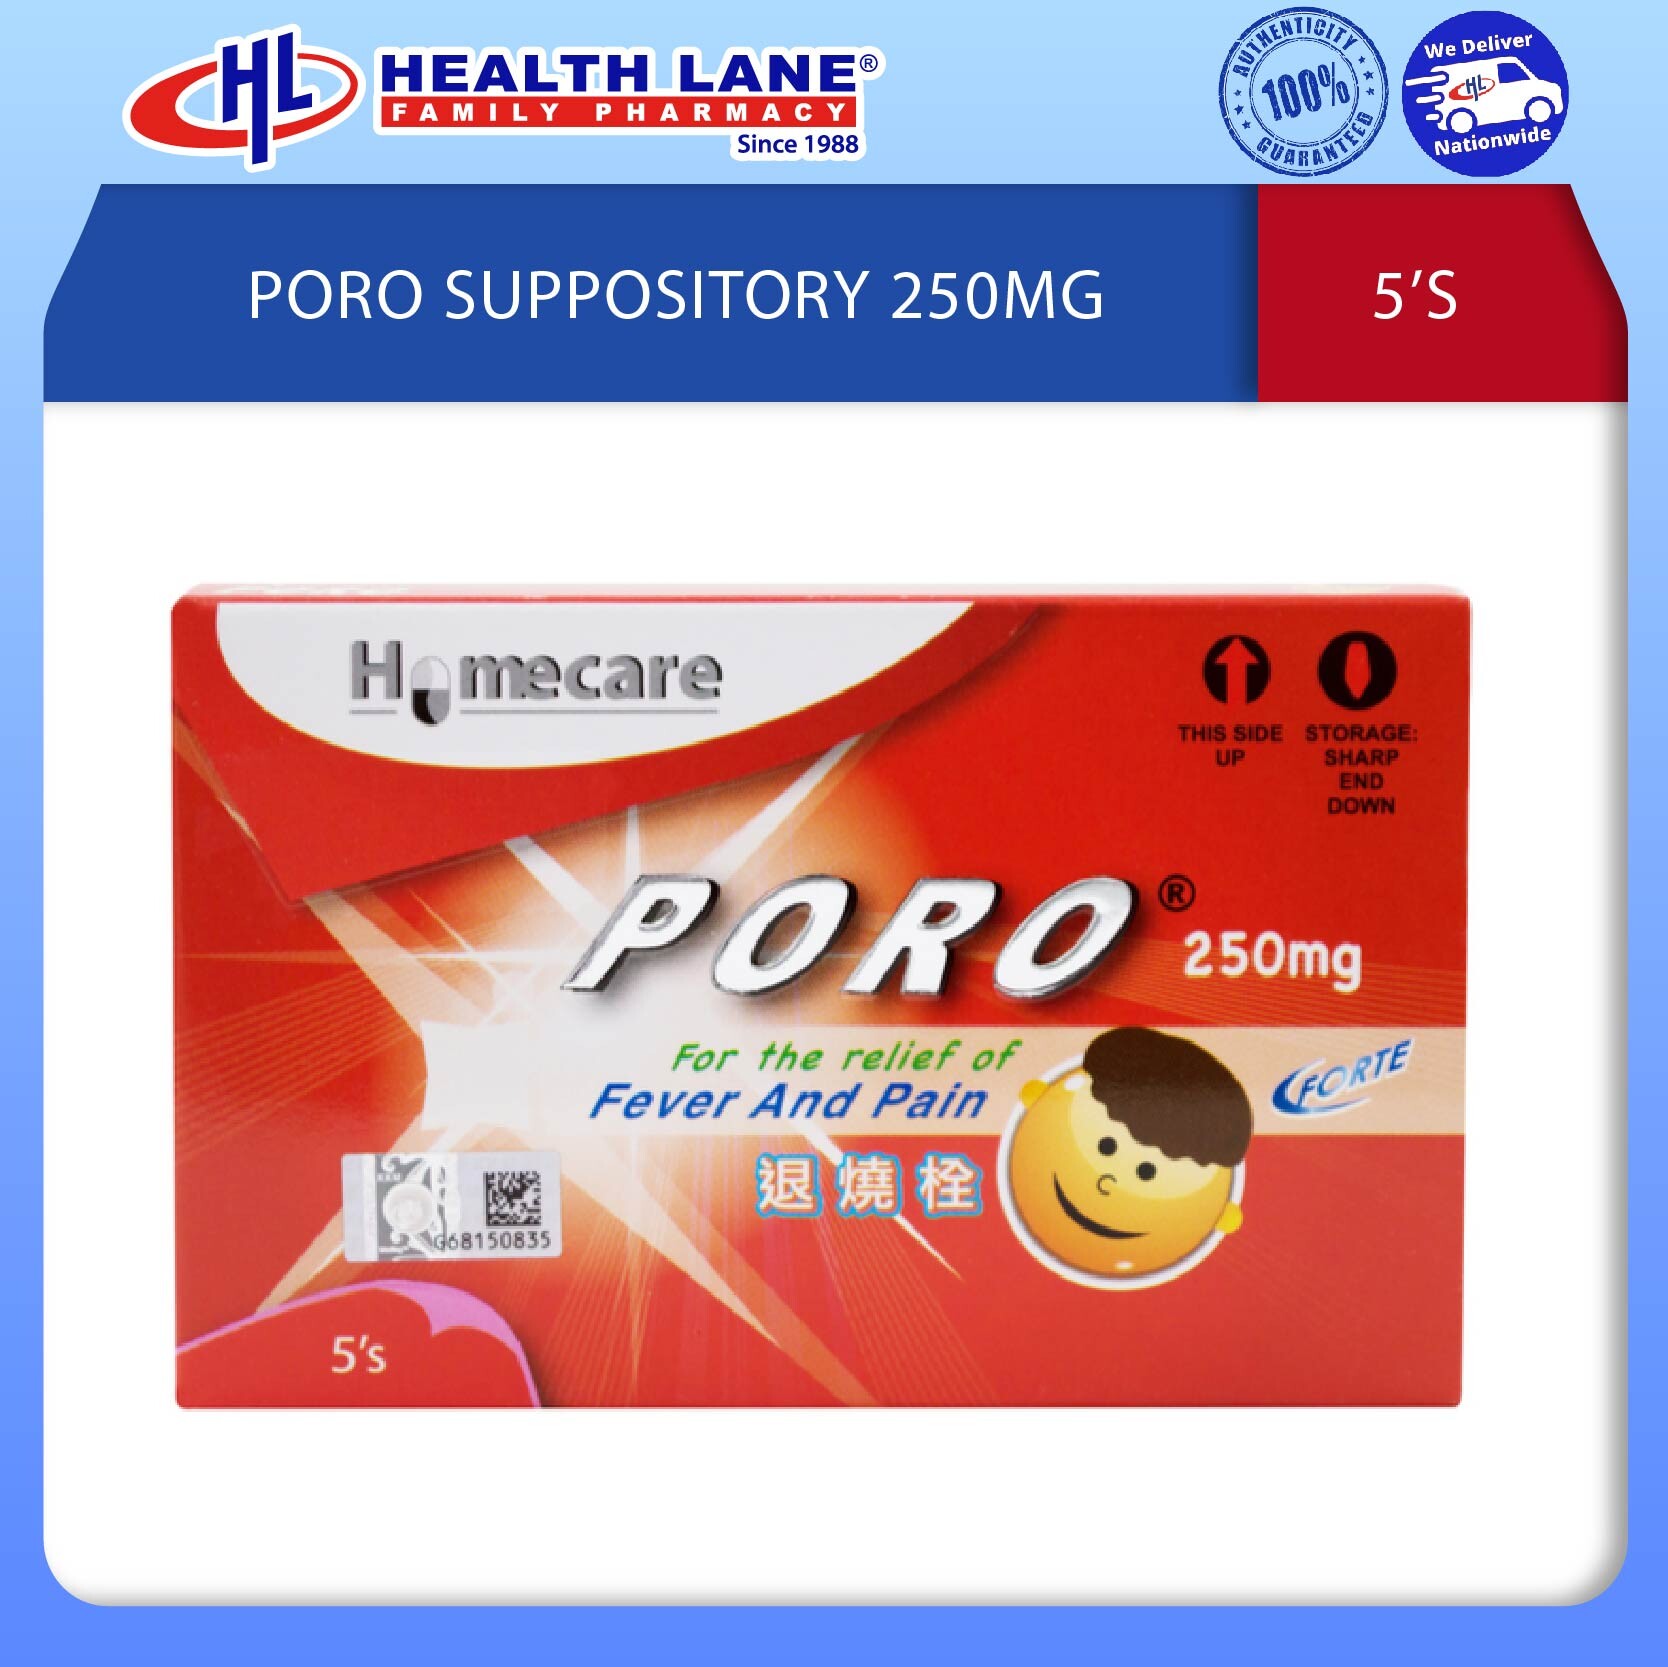 PORO SUPPOSITORY 250MG 5'S 